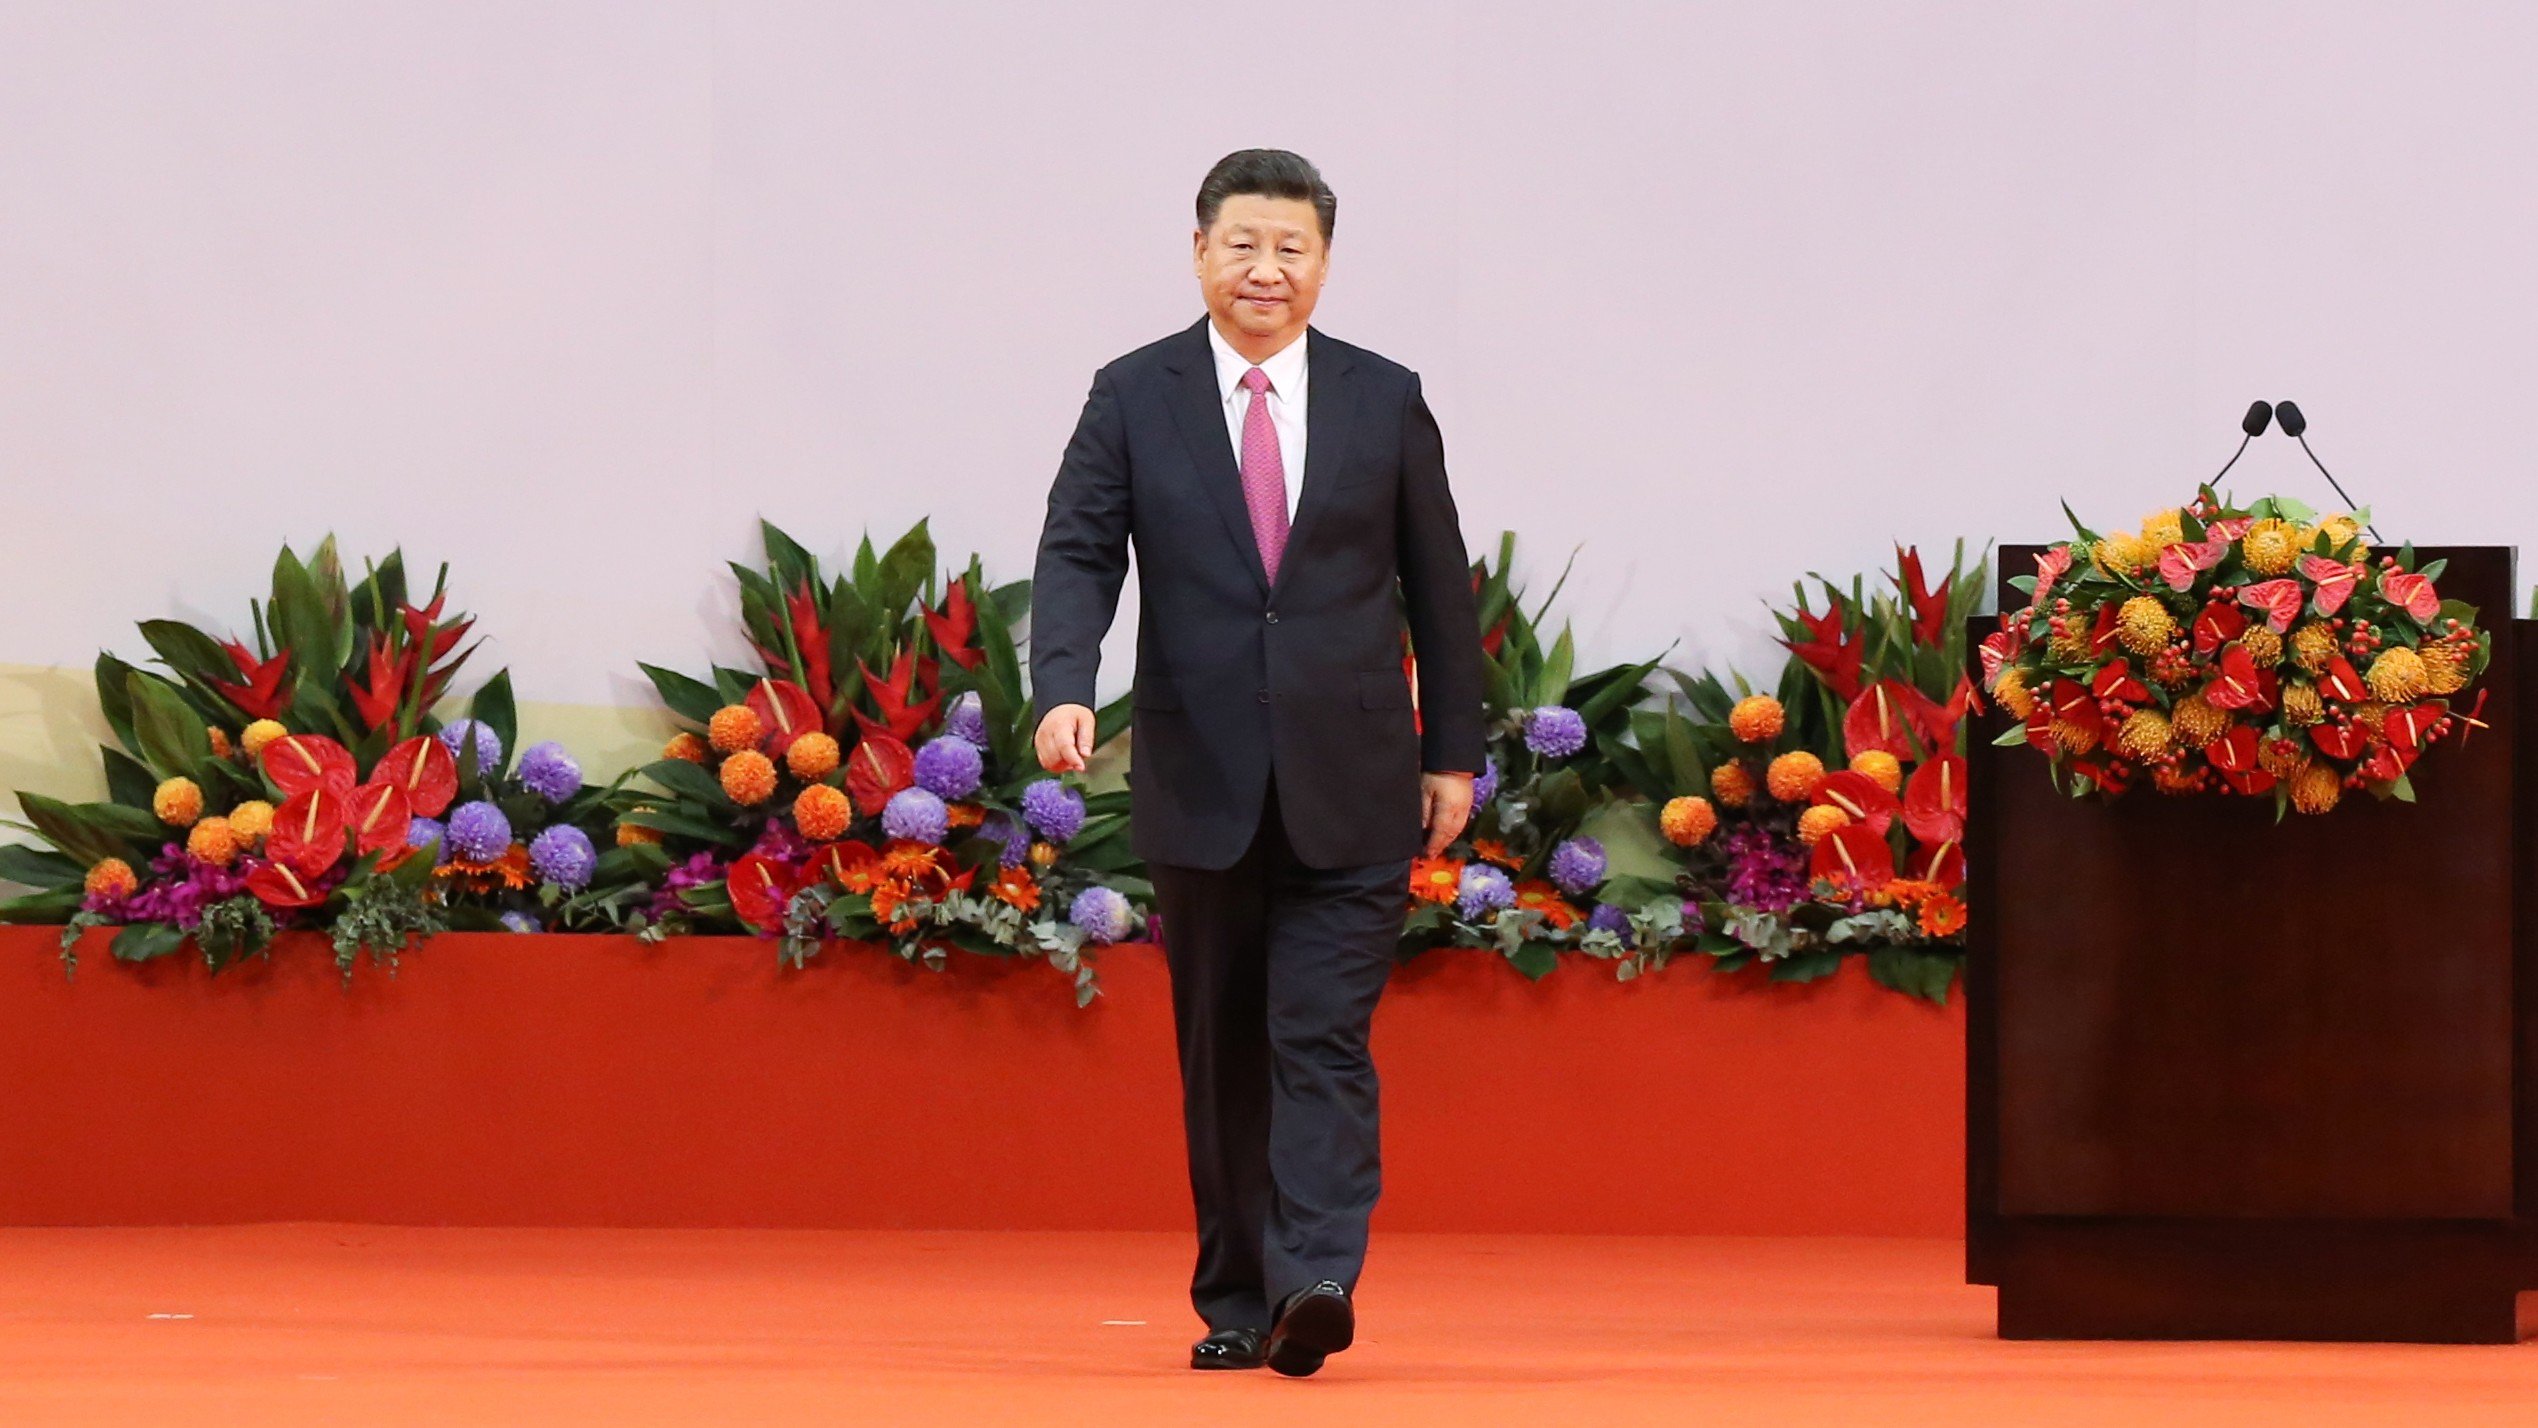 In the latter part of his speech, President Xi Jinping adopted a softer stance by calling on the public to solve problems through sensible communication instead of political confrontation. Photo: Sam Tsang